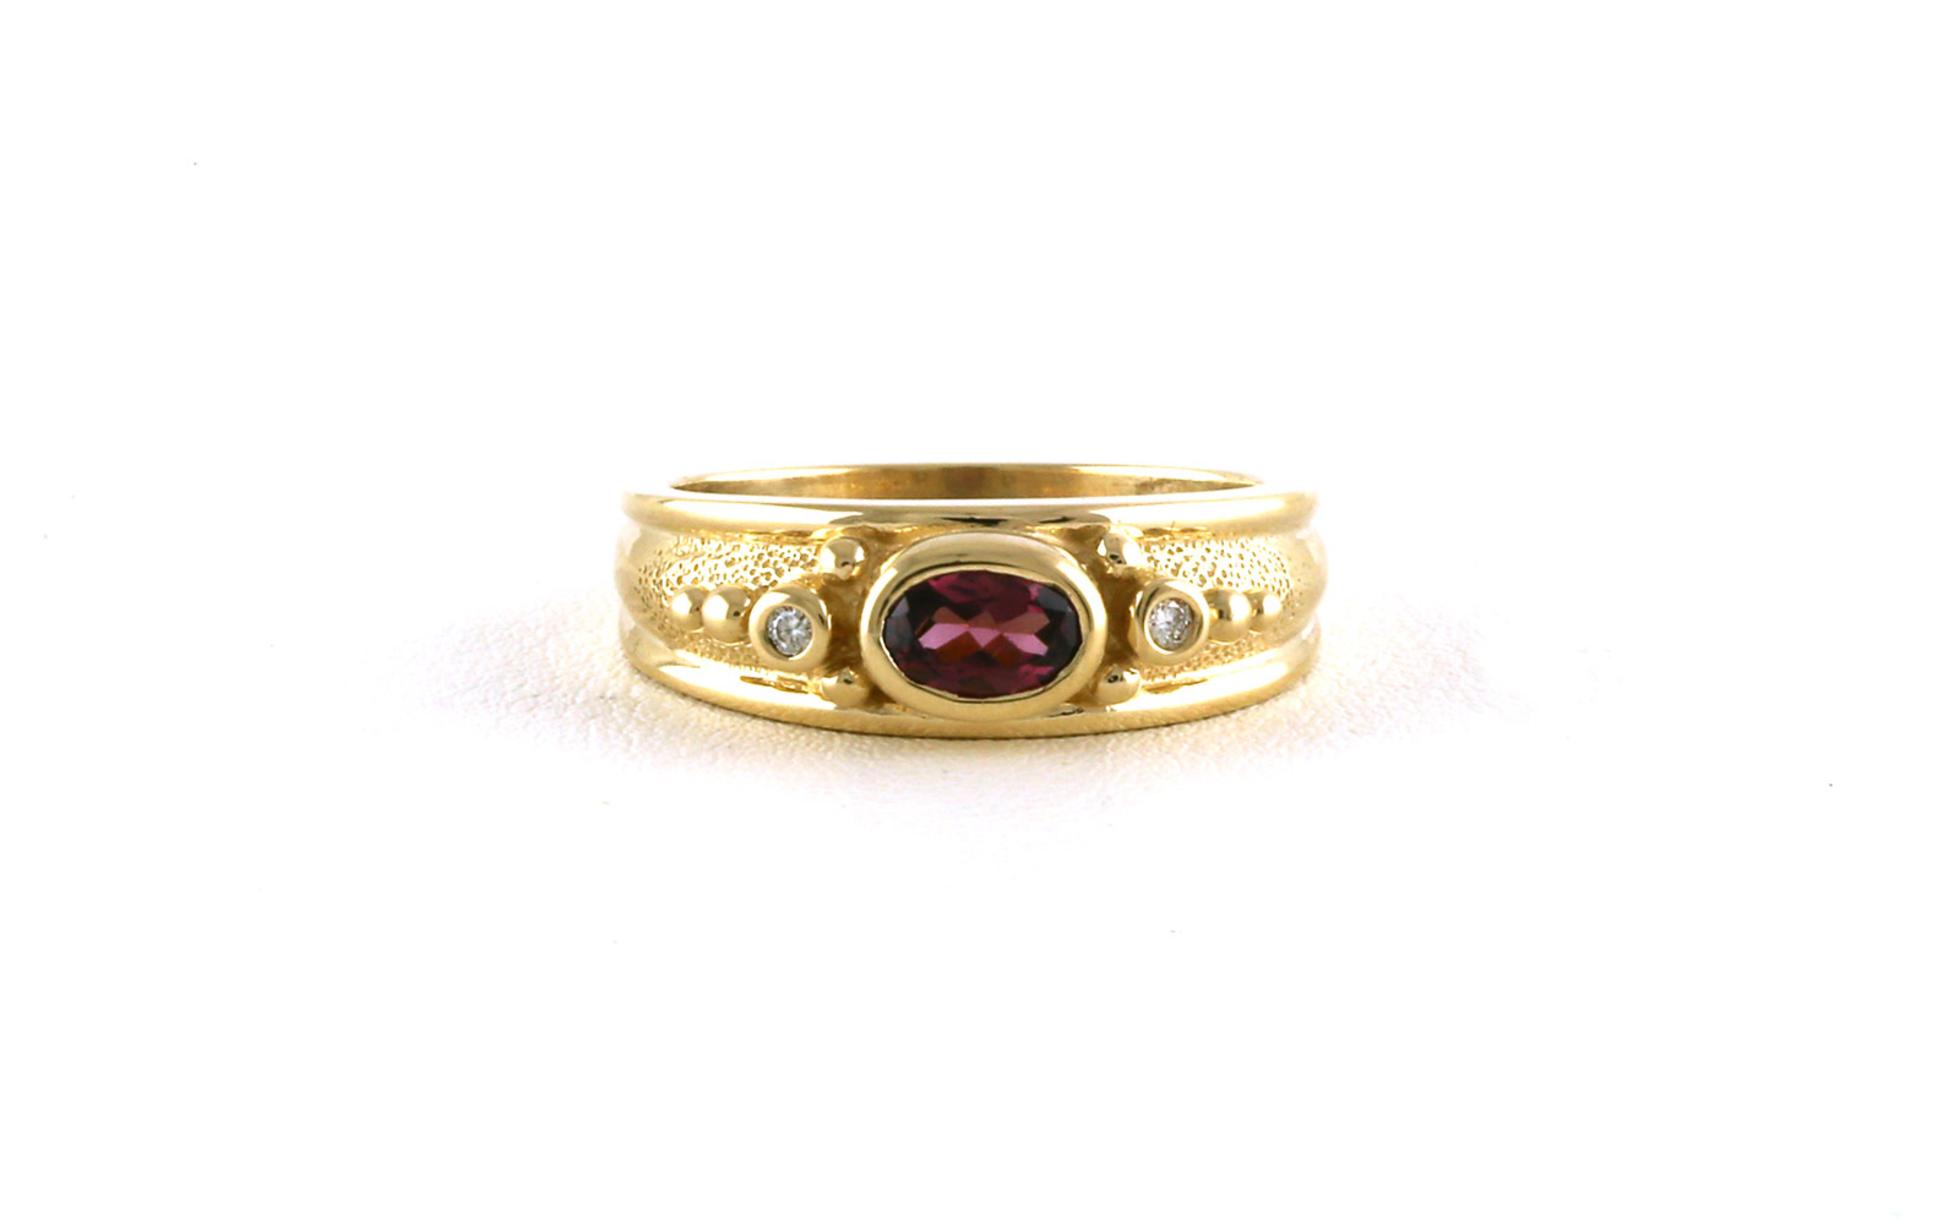 Estate Piece: Bezel-set Oval-cut Pink Sapphire Ring in Yellow Gold (0.54cts TWT)